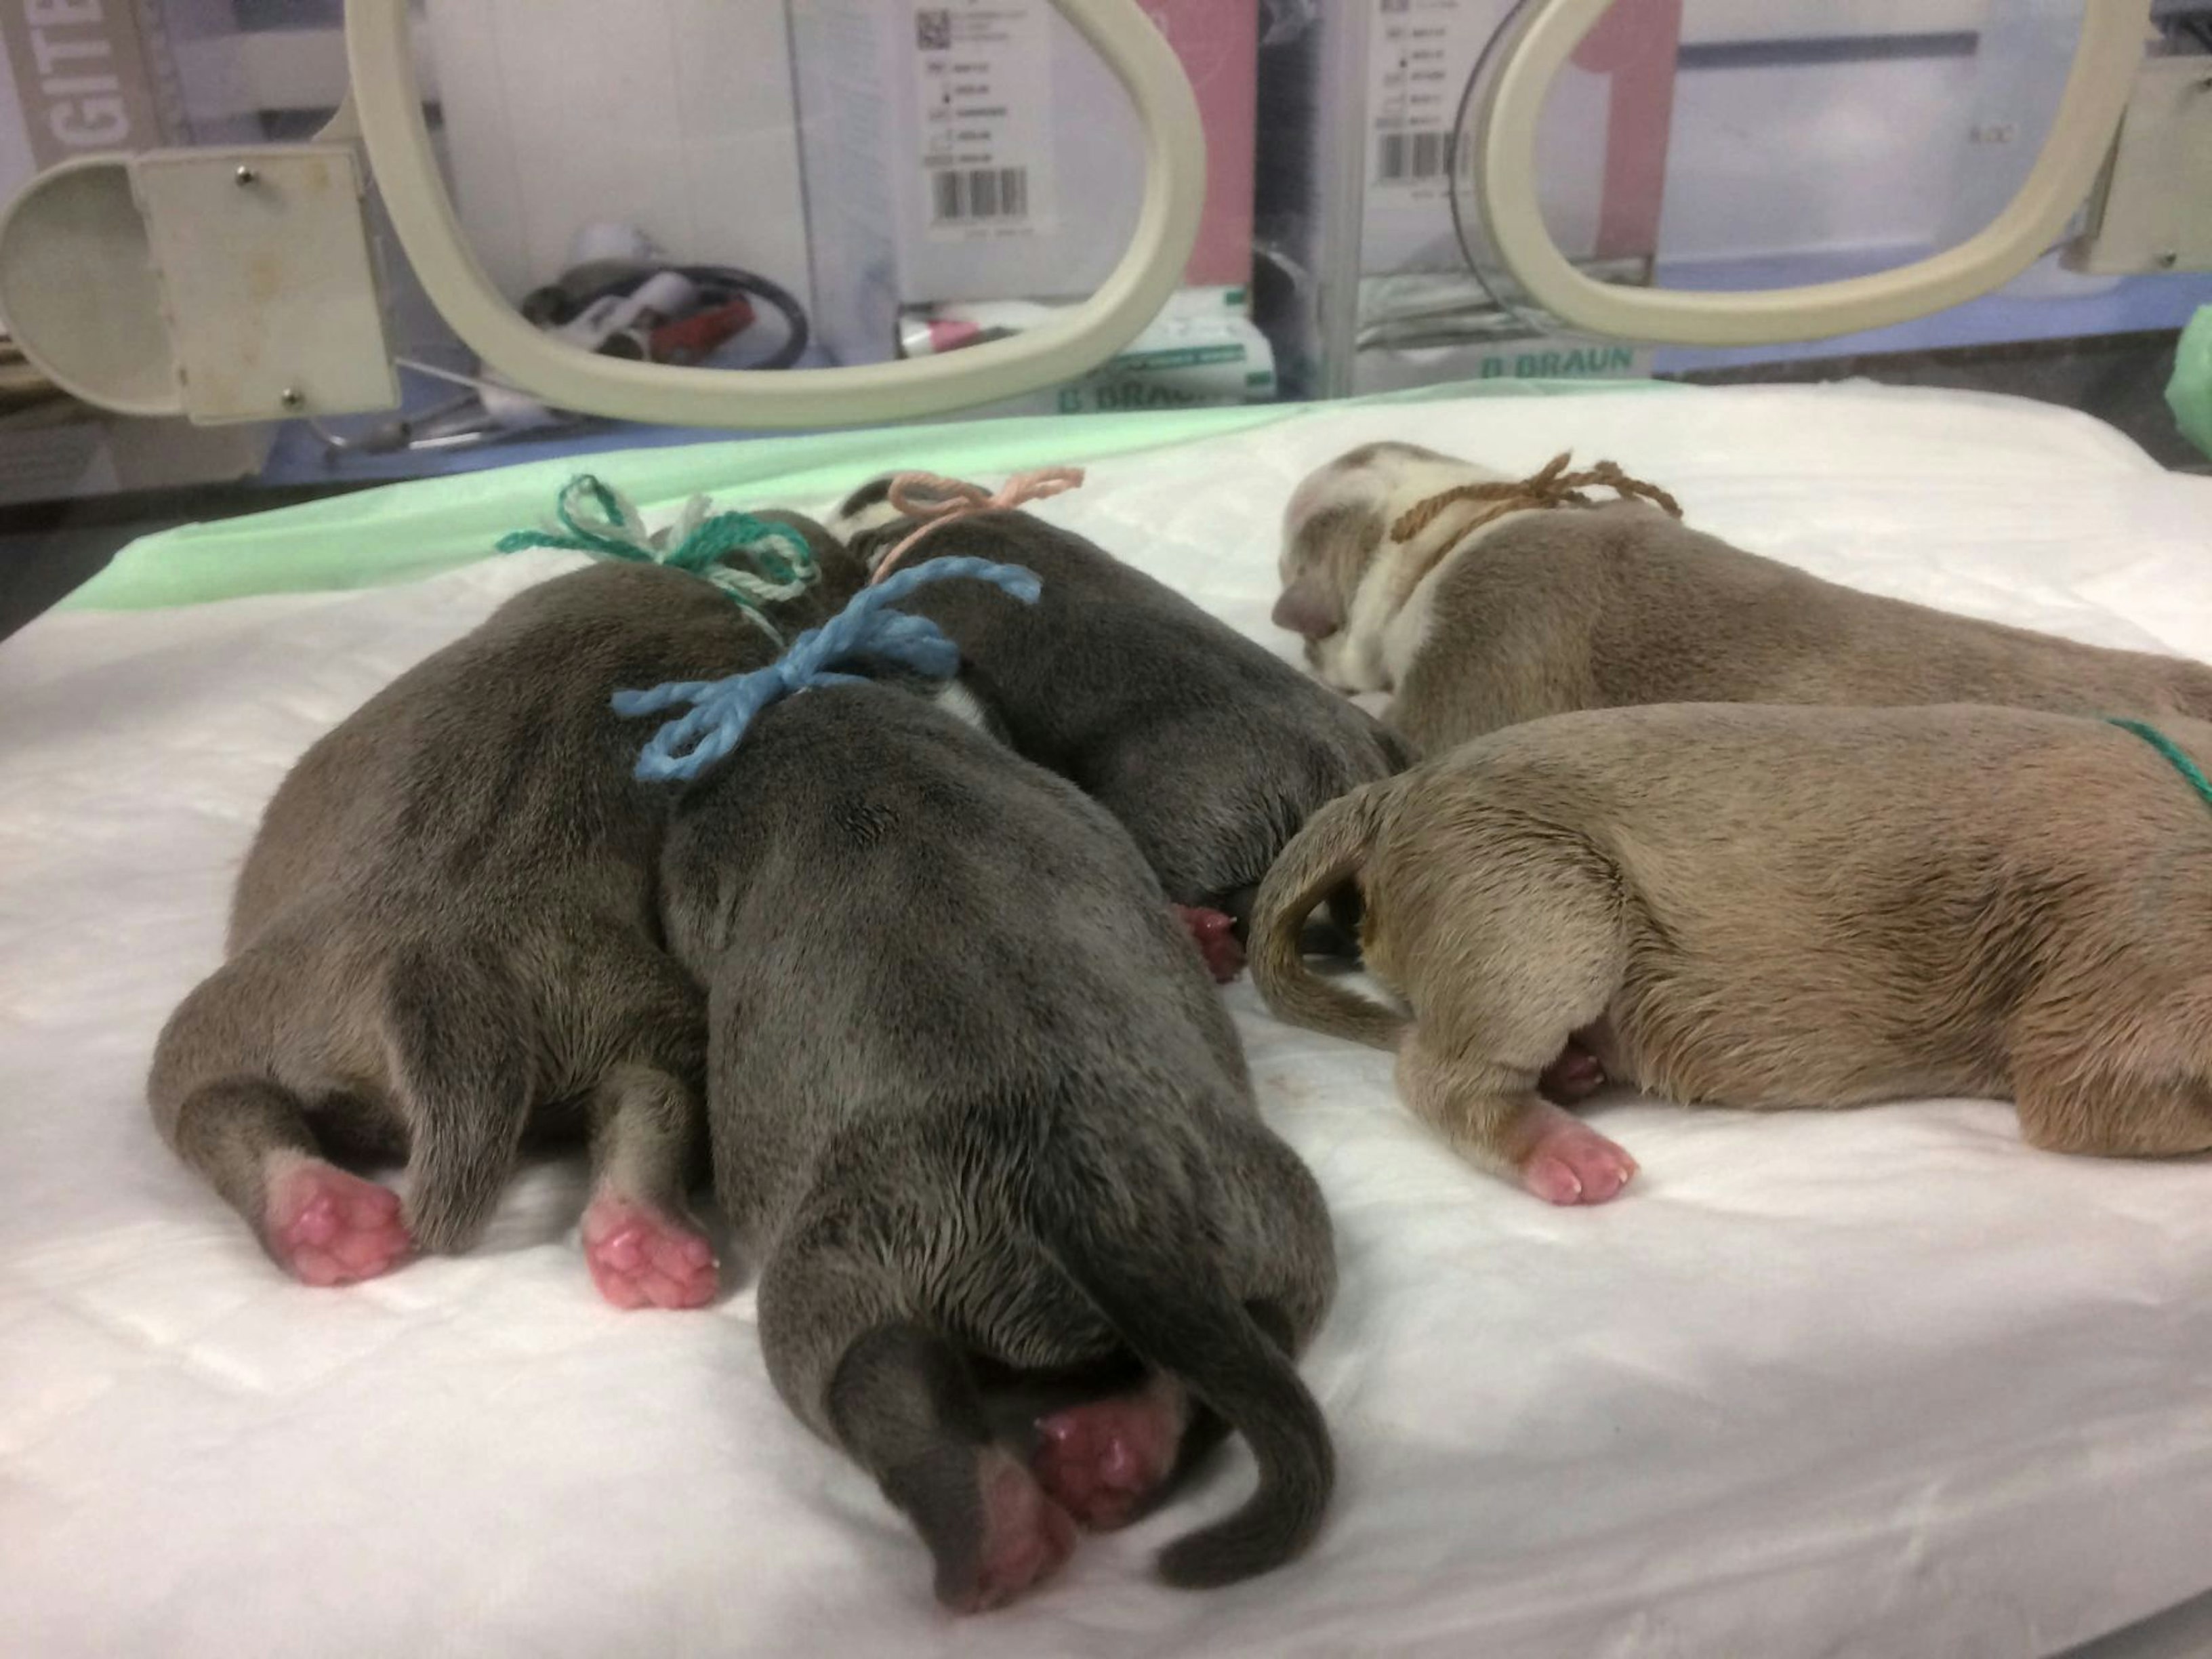 what do you do with a newborn puppies umbilical cord